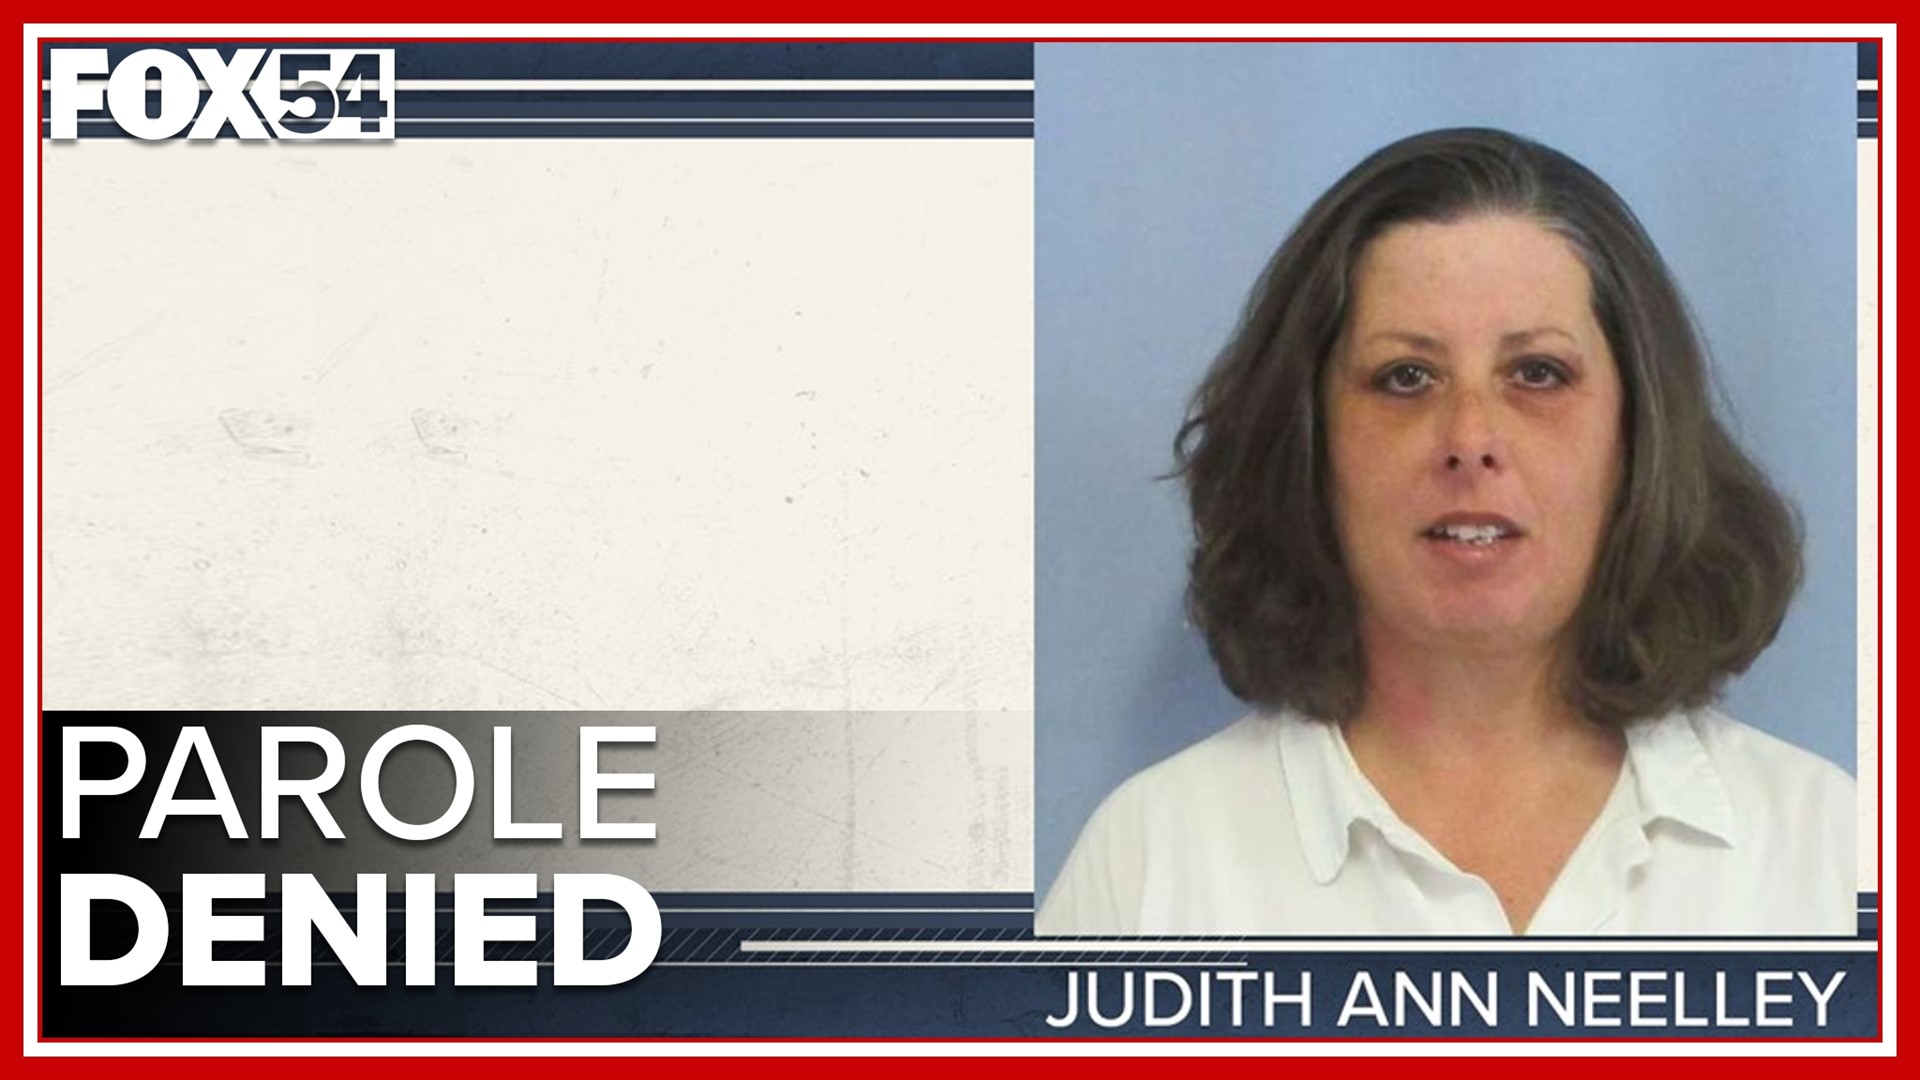 Family of Judith Ann Neelley's victims are relieved she will remain behind bars, but wary they will have to go through the process again in five years.